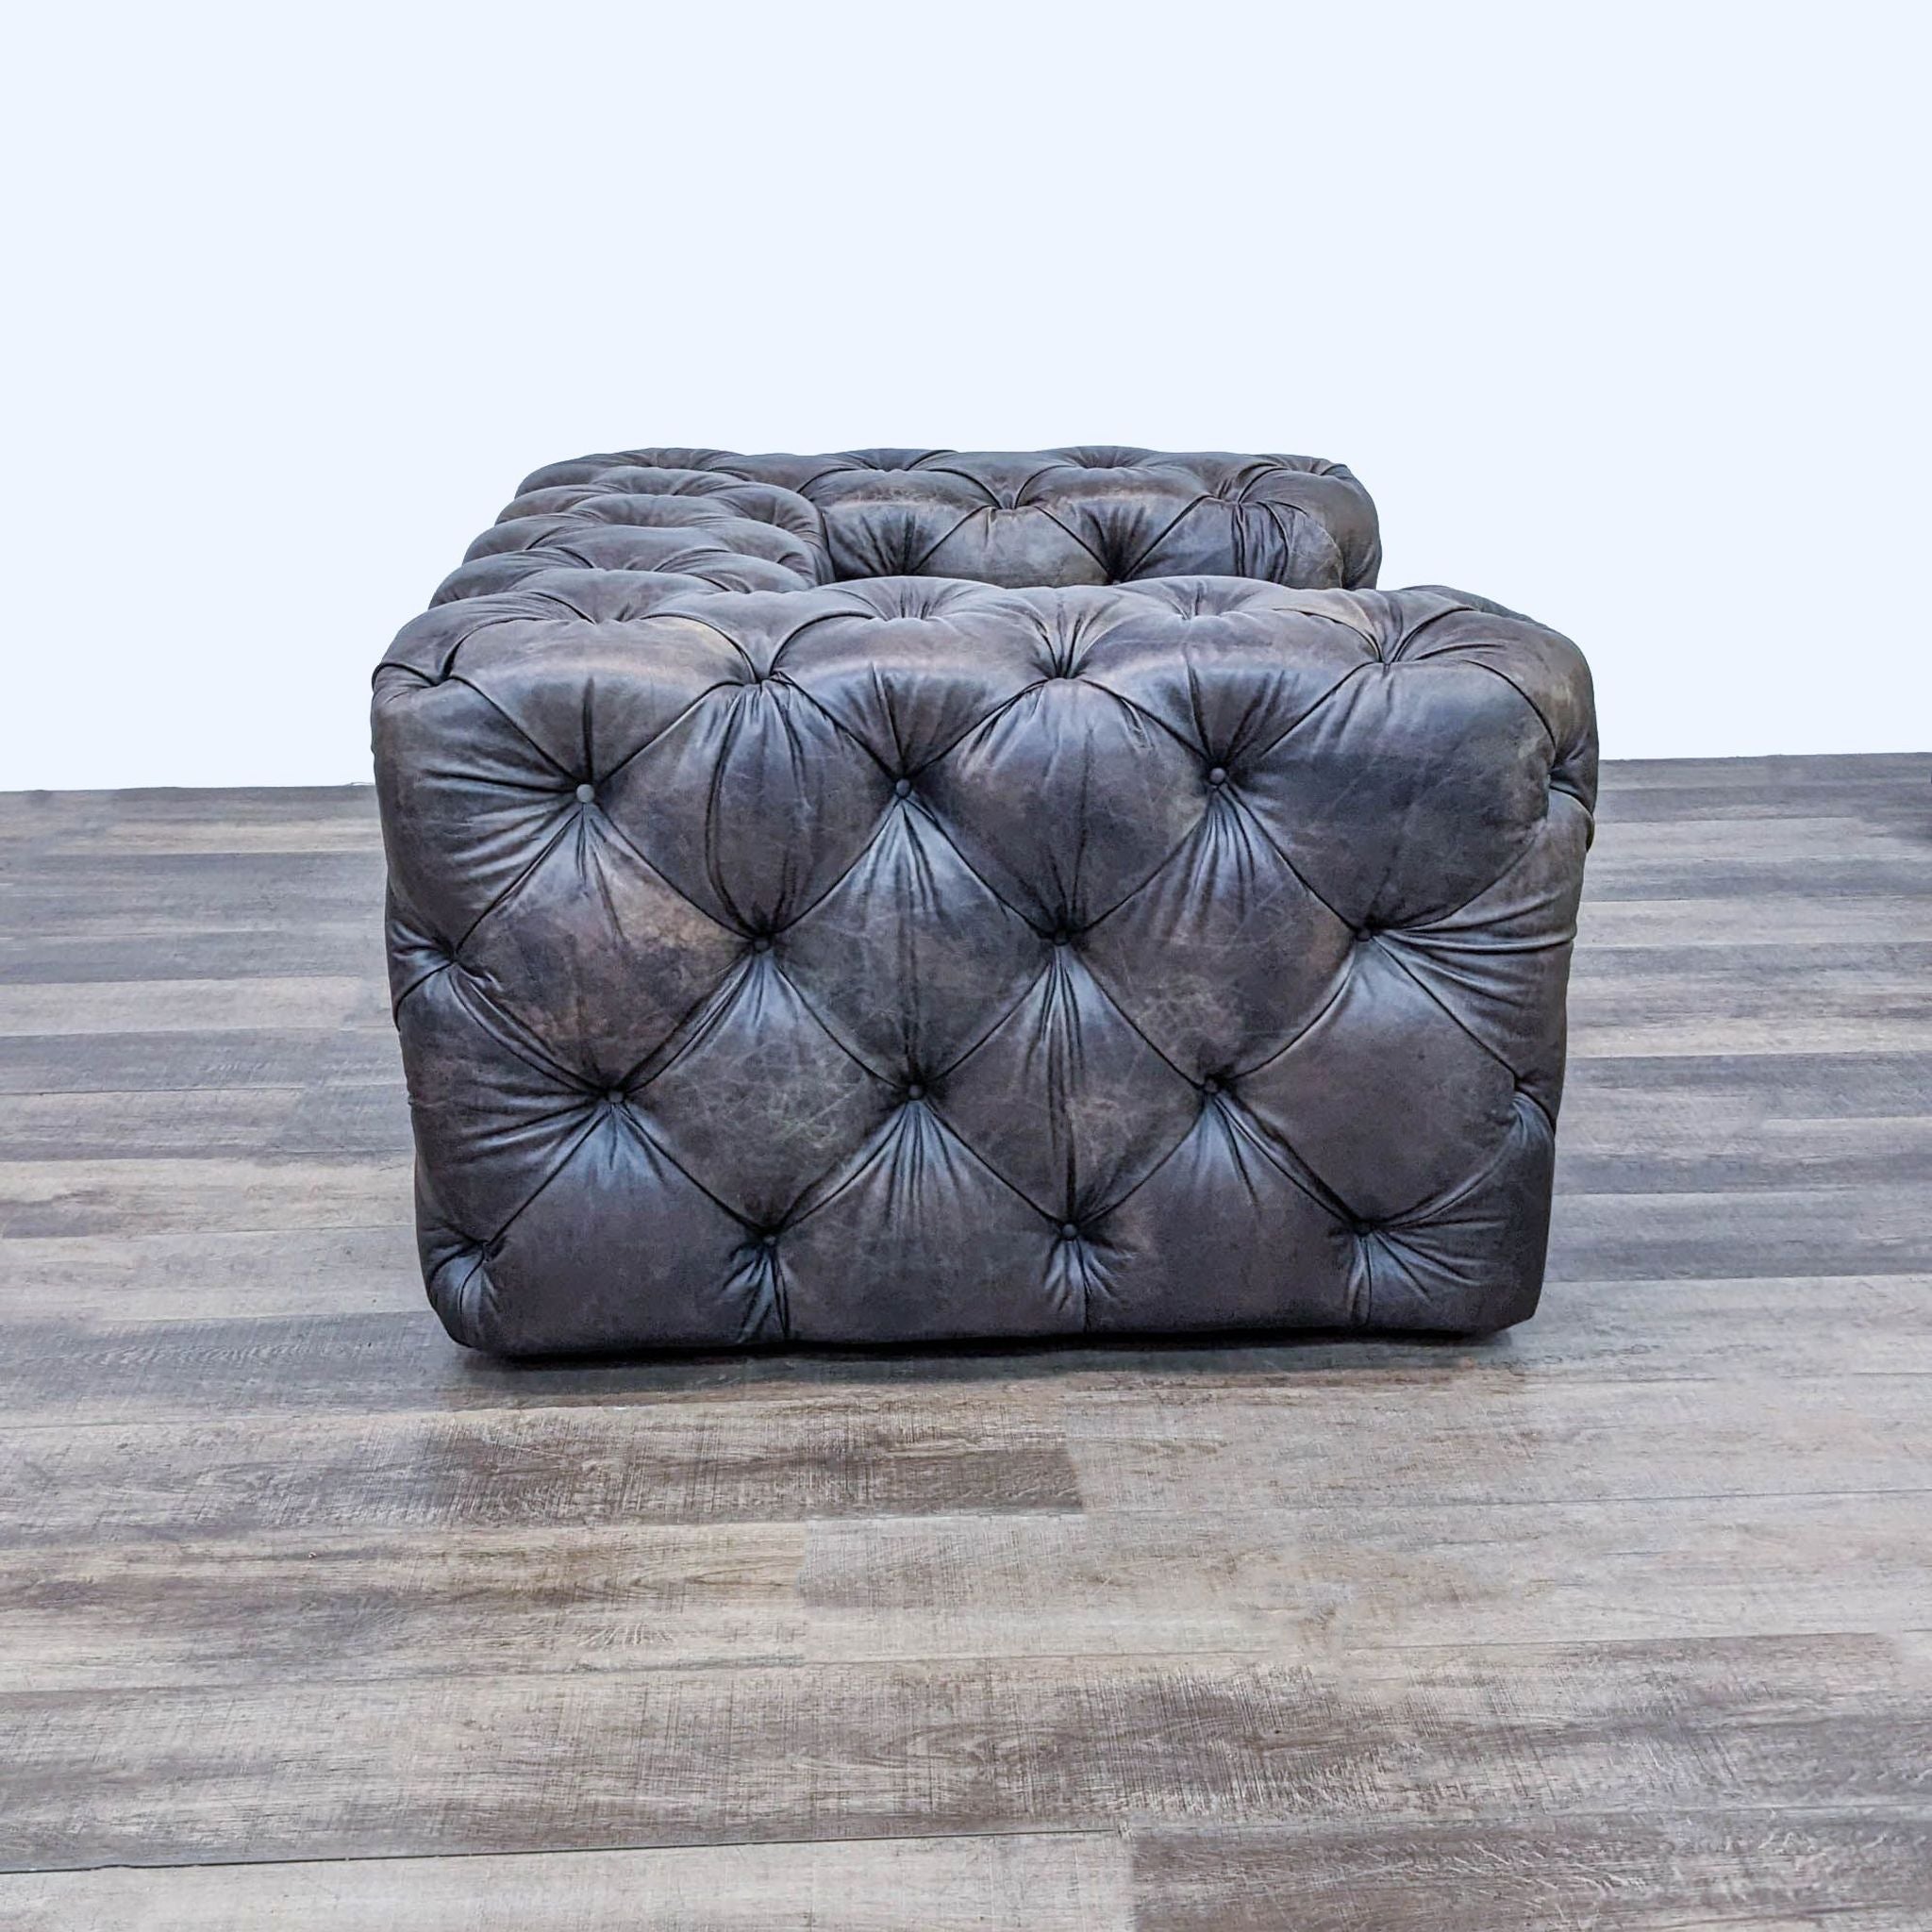 Alt text 2: Side view of a button-tufted SoHo club chair by Restoration Hardware in dark leather, highlighting the luxurious plush padding and low profile design.